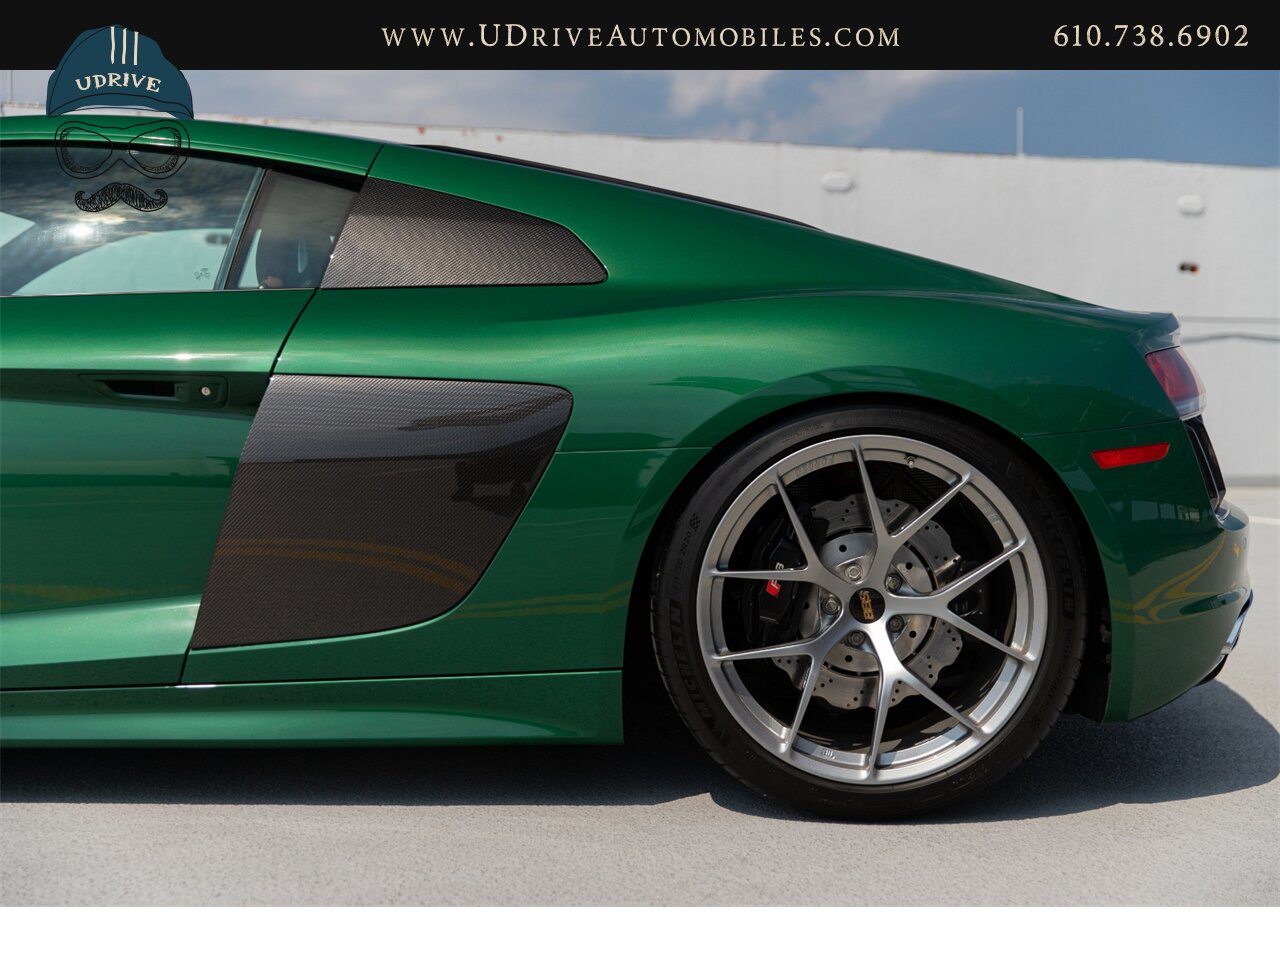 2017 Audi R8 Audi Exclusive Avocado Green Vermont Brown Leather  Diamond Stitching V10 Carbon Fiber - Photo 28 - West Chester, PA 19382